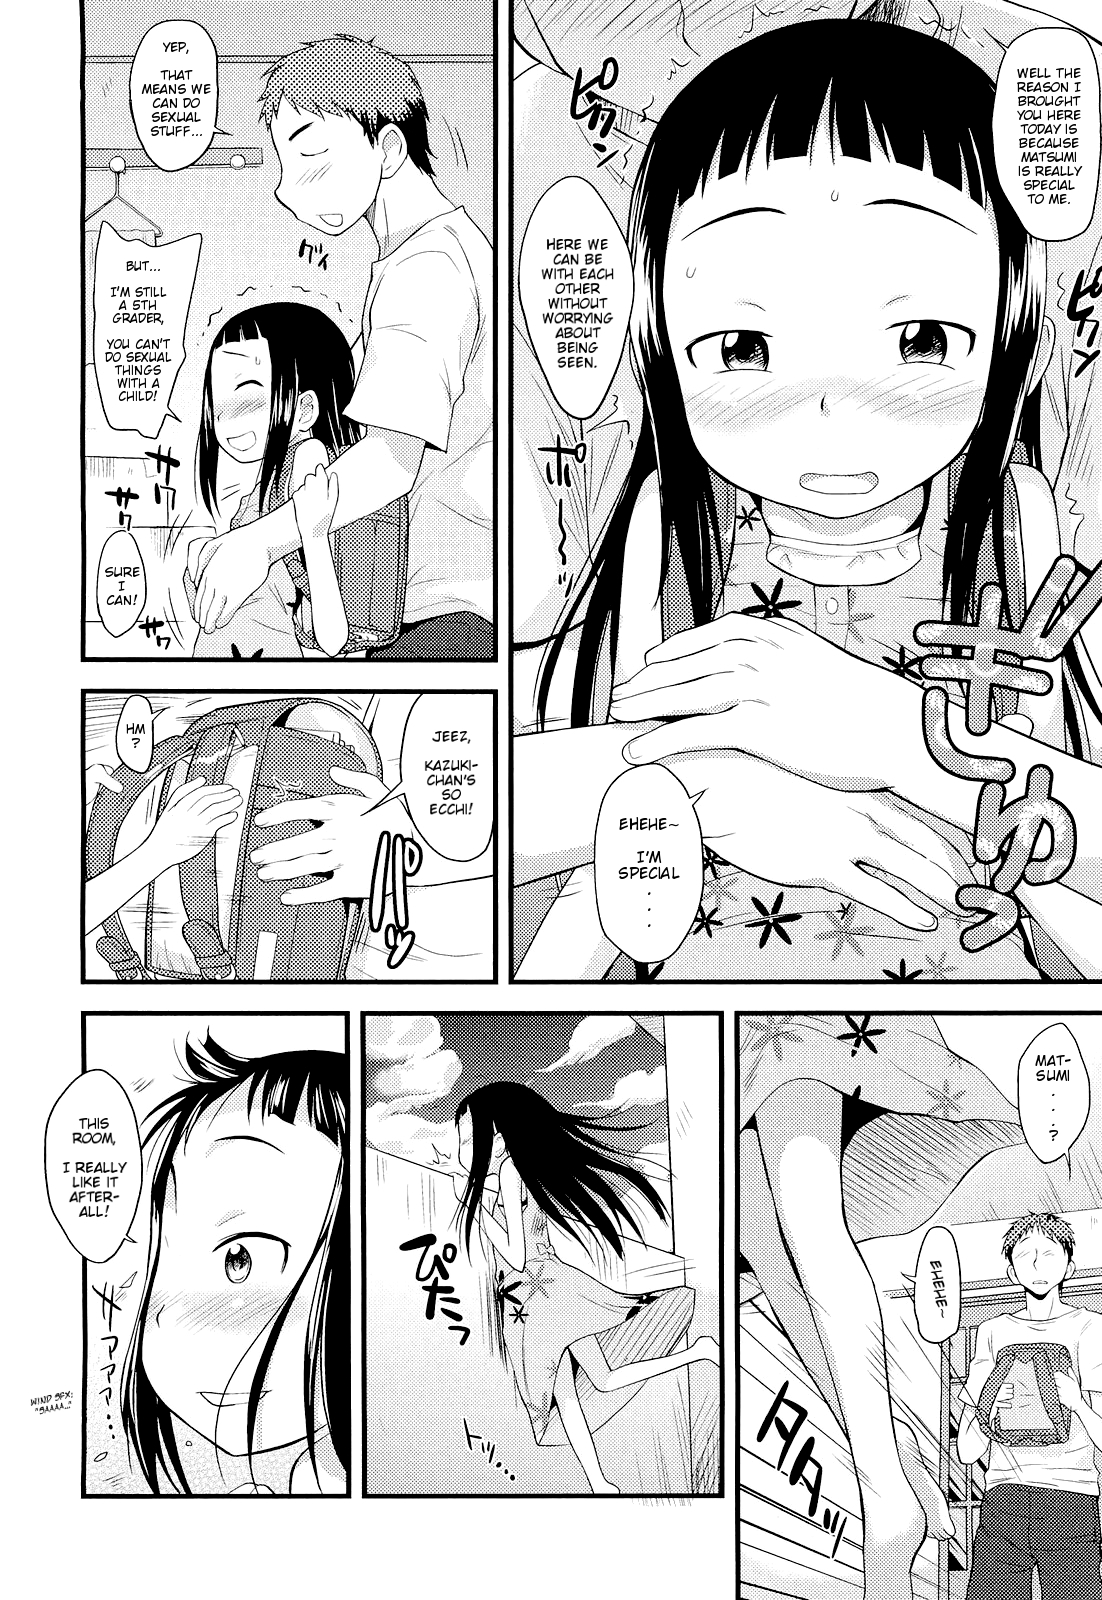 [Nohri Isawa] Futari no Tokubetsu nao Heya (A Special Room for Two people) [ENG] [Mistvern] page 2 full